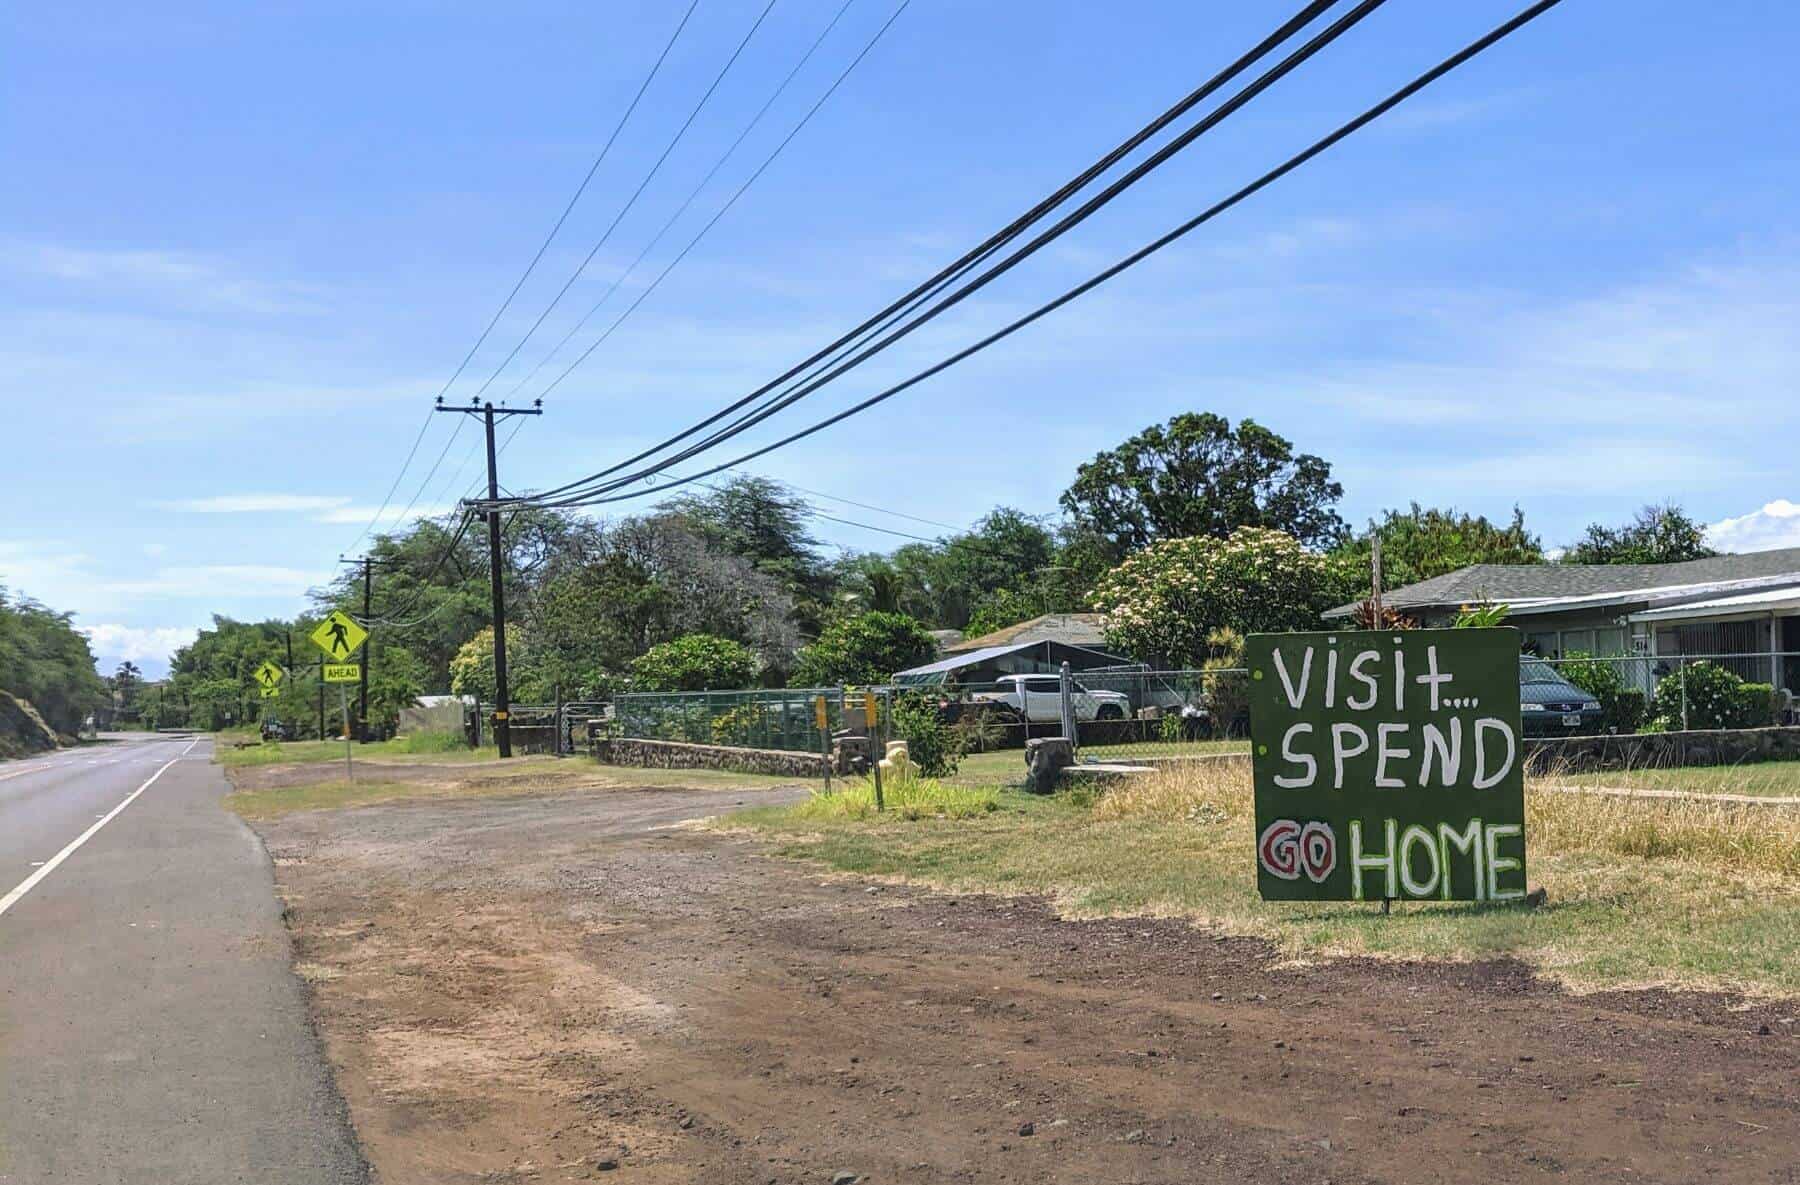 visit -spend -go home sign In Molokai